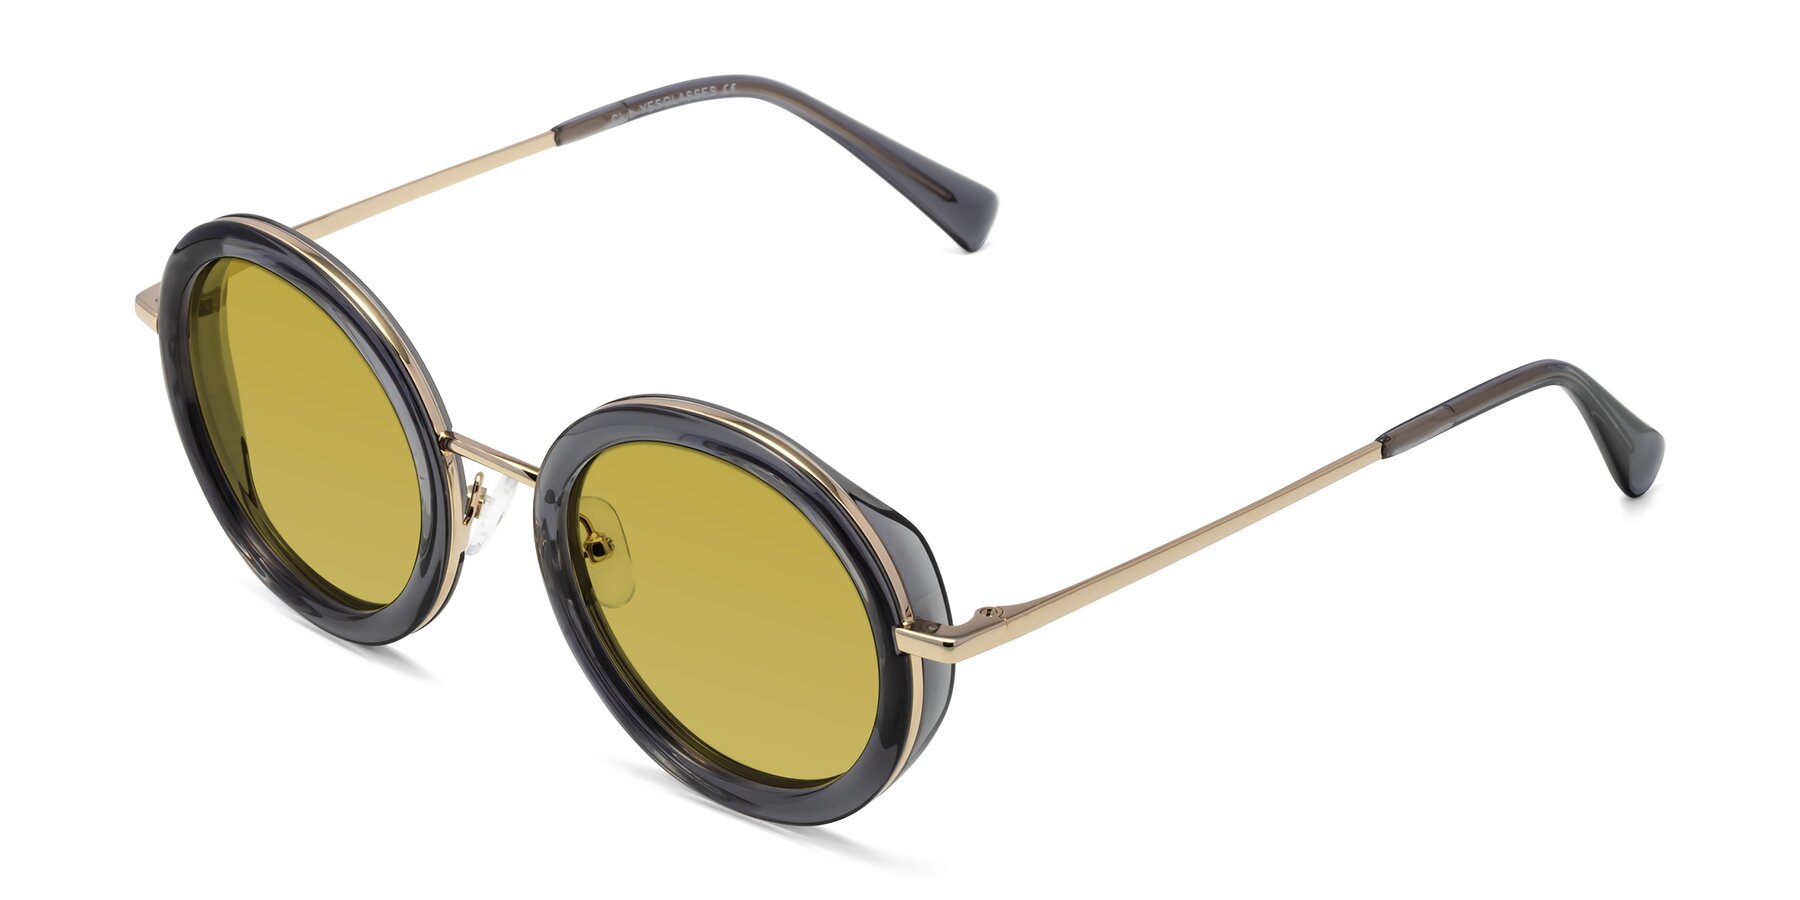 Angle of Club in Gray-Gold with Champagne Tinted Lenses